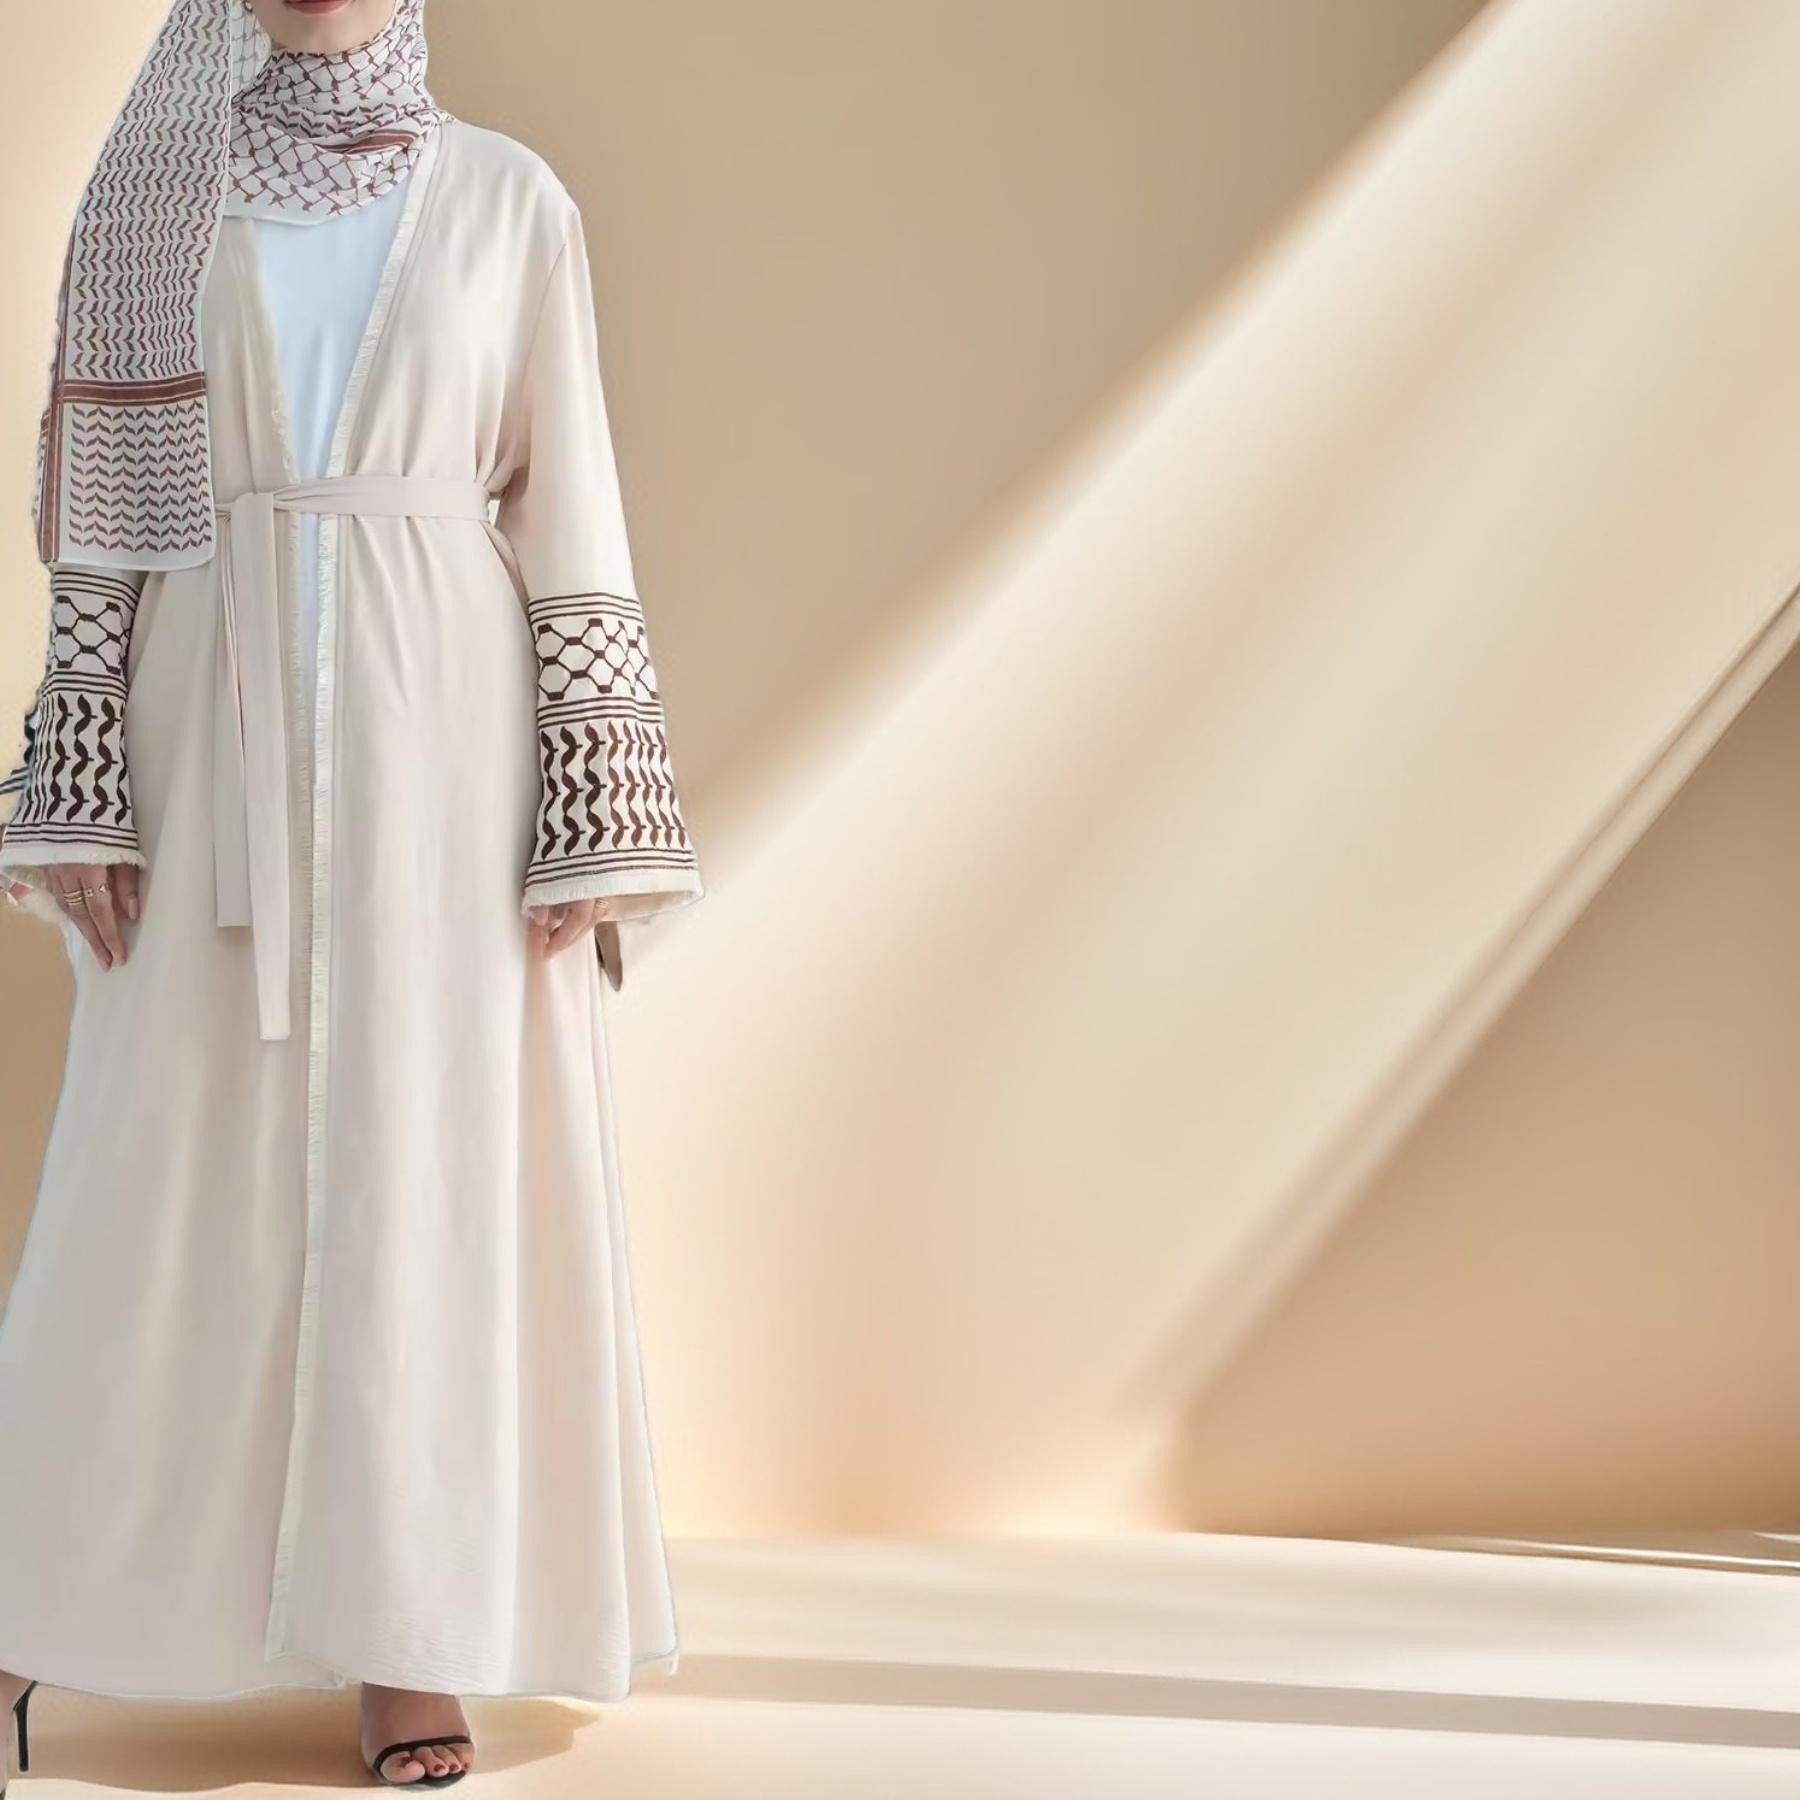 Palestine Ethereal Abaya - Try Modest Limited 